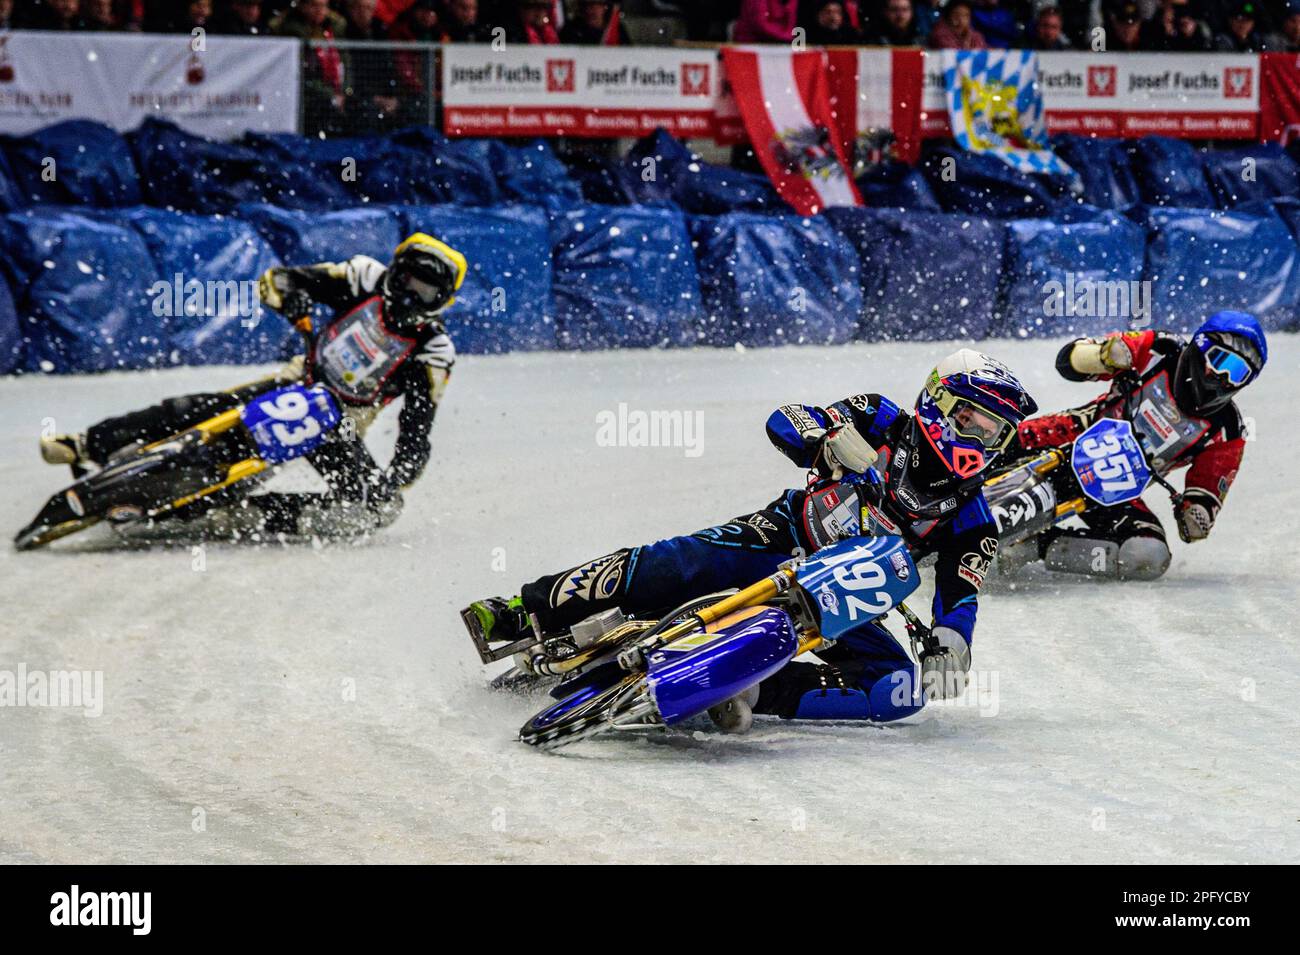 Inzell, Germany on Sunday 19th March 2023. Niclas Svensson (192) (White) leads Franz Mayerbüchler (93) (Yellow) and Jo Saetre (357) (Blue) during the Ice Speedway Gladiators World Championship Final 2 at Max-Aicher-Arena, Inzell, Germany on Sunday 19th March 2023. (Photo: Ian Charles | MI News) Credit: MI News & Sport /Alamy Live News Stock Photo